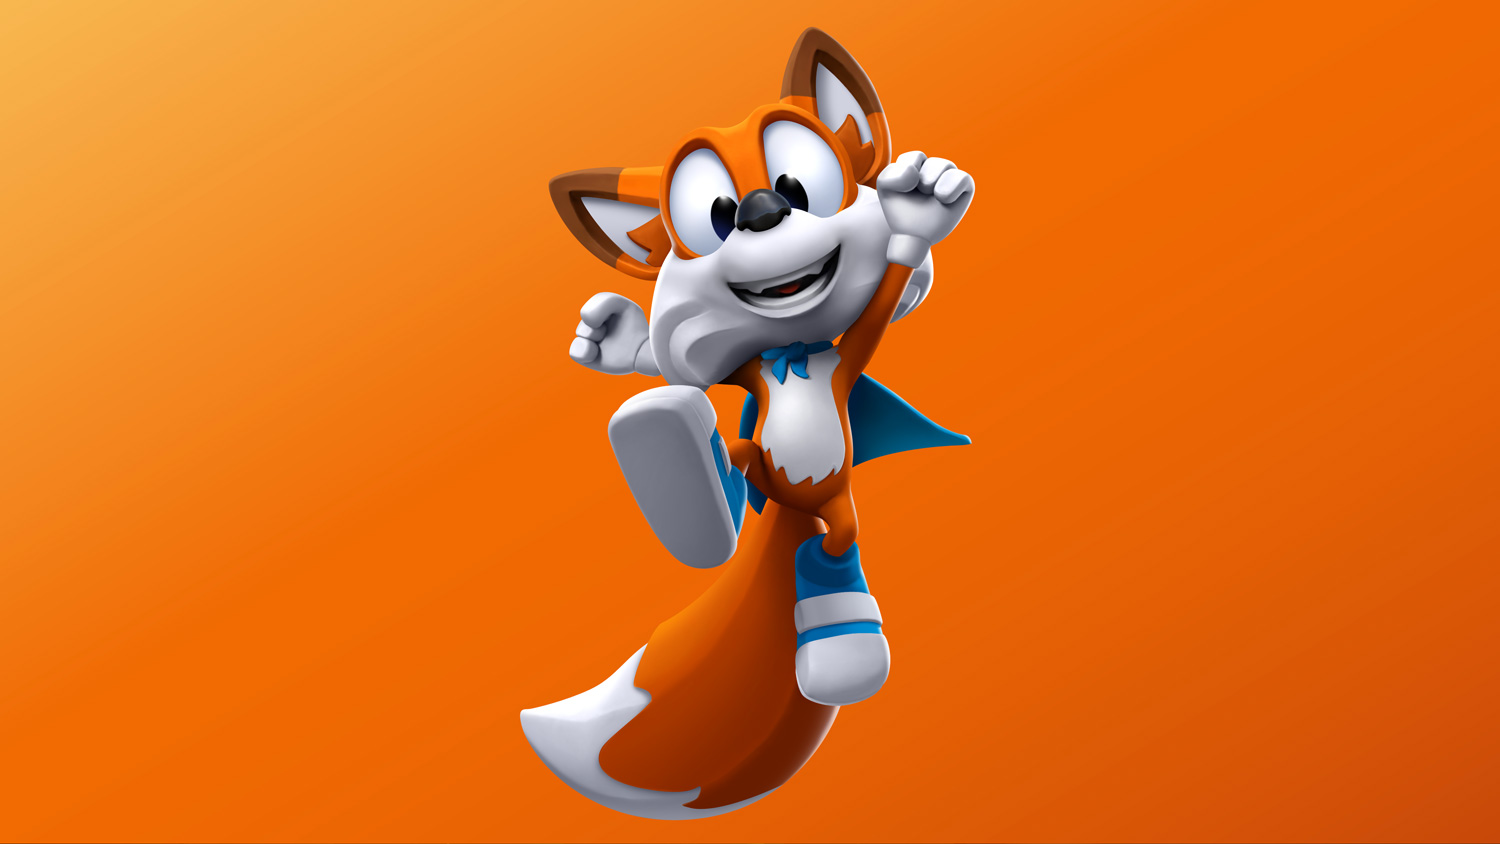 The 3D, VR platformer "Lucky's Tale" was one of the first Oculus Studios titles.